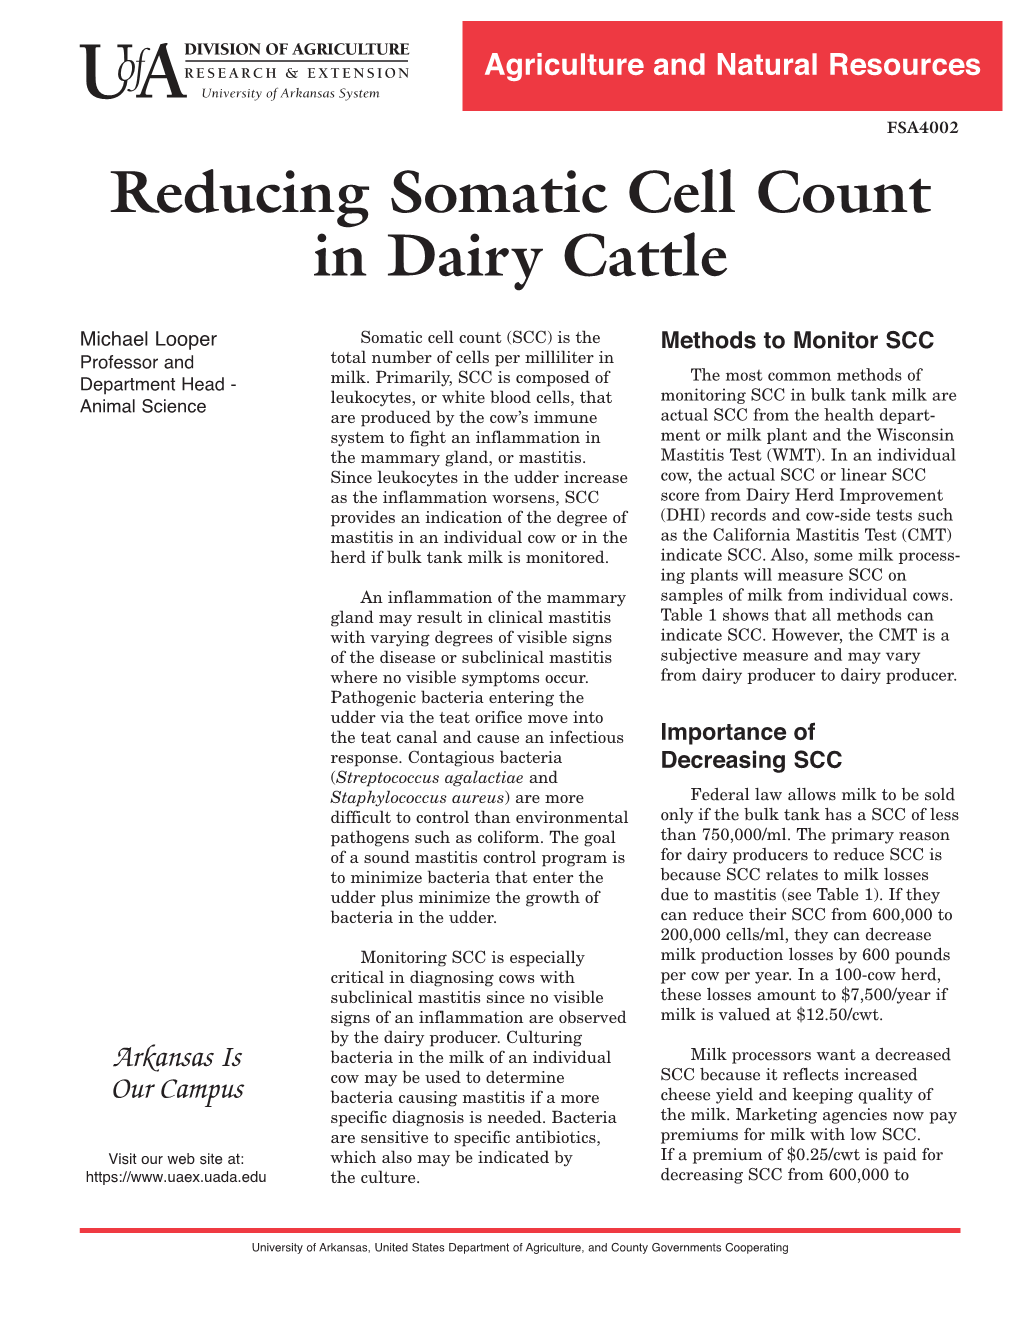 Reducing Somatic Cell Count in Dairy Cattle